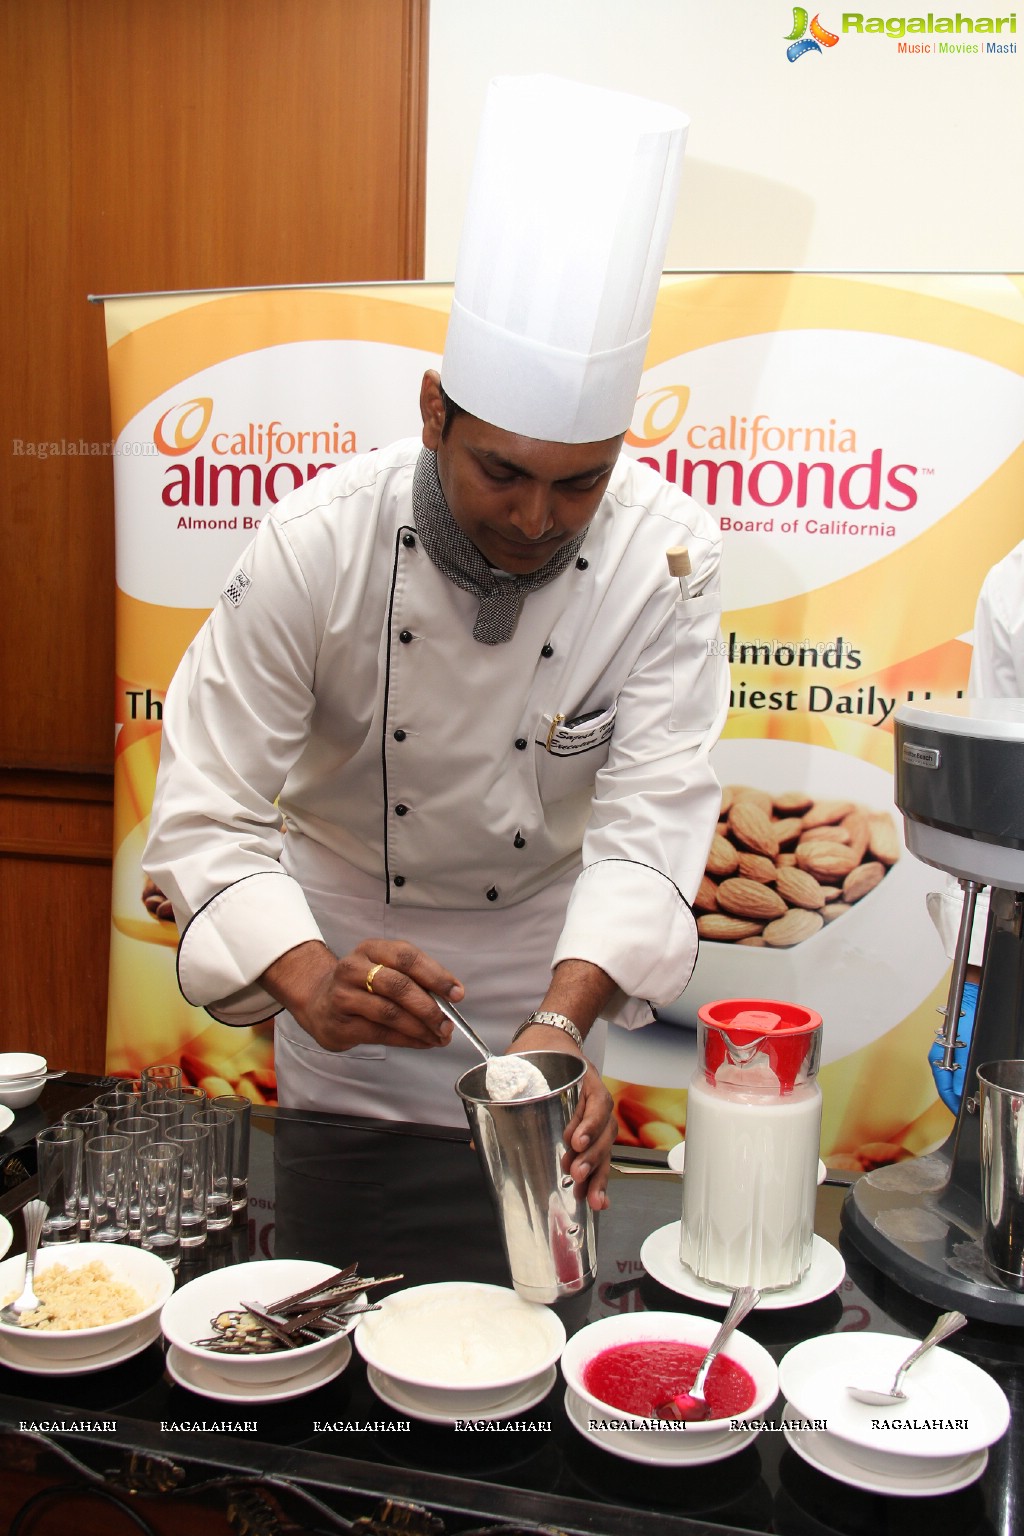 Almond Board of California celebrates an Afternoon in Hyderabad